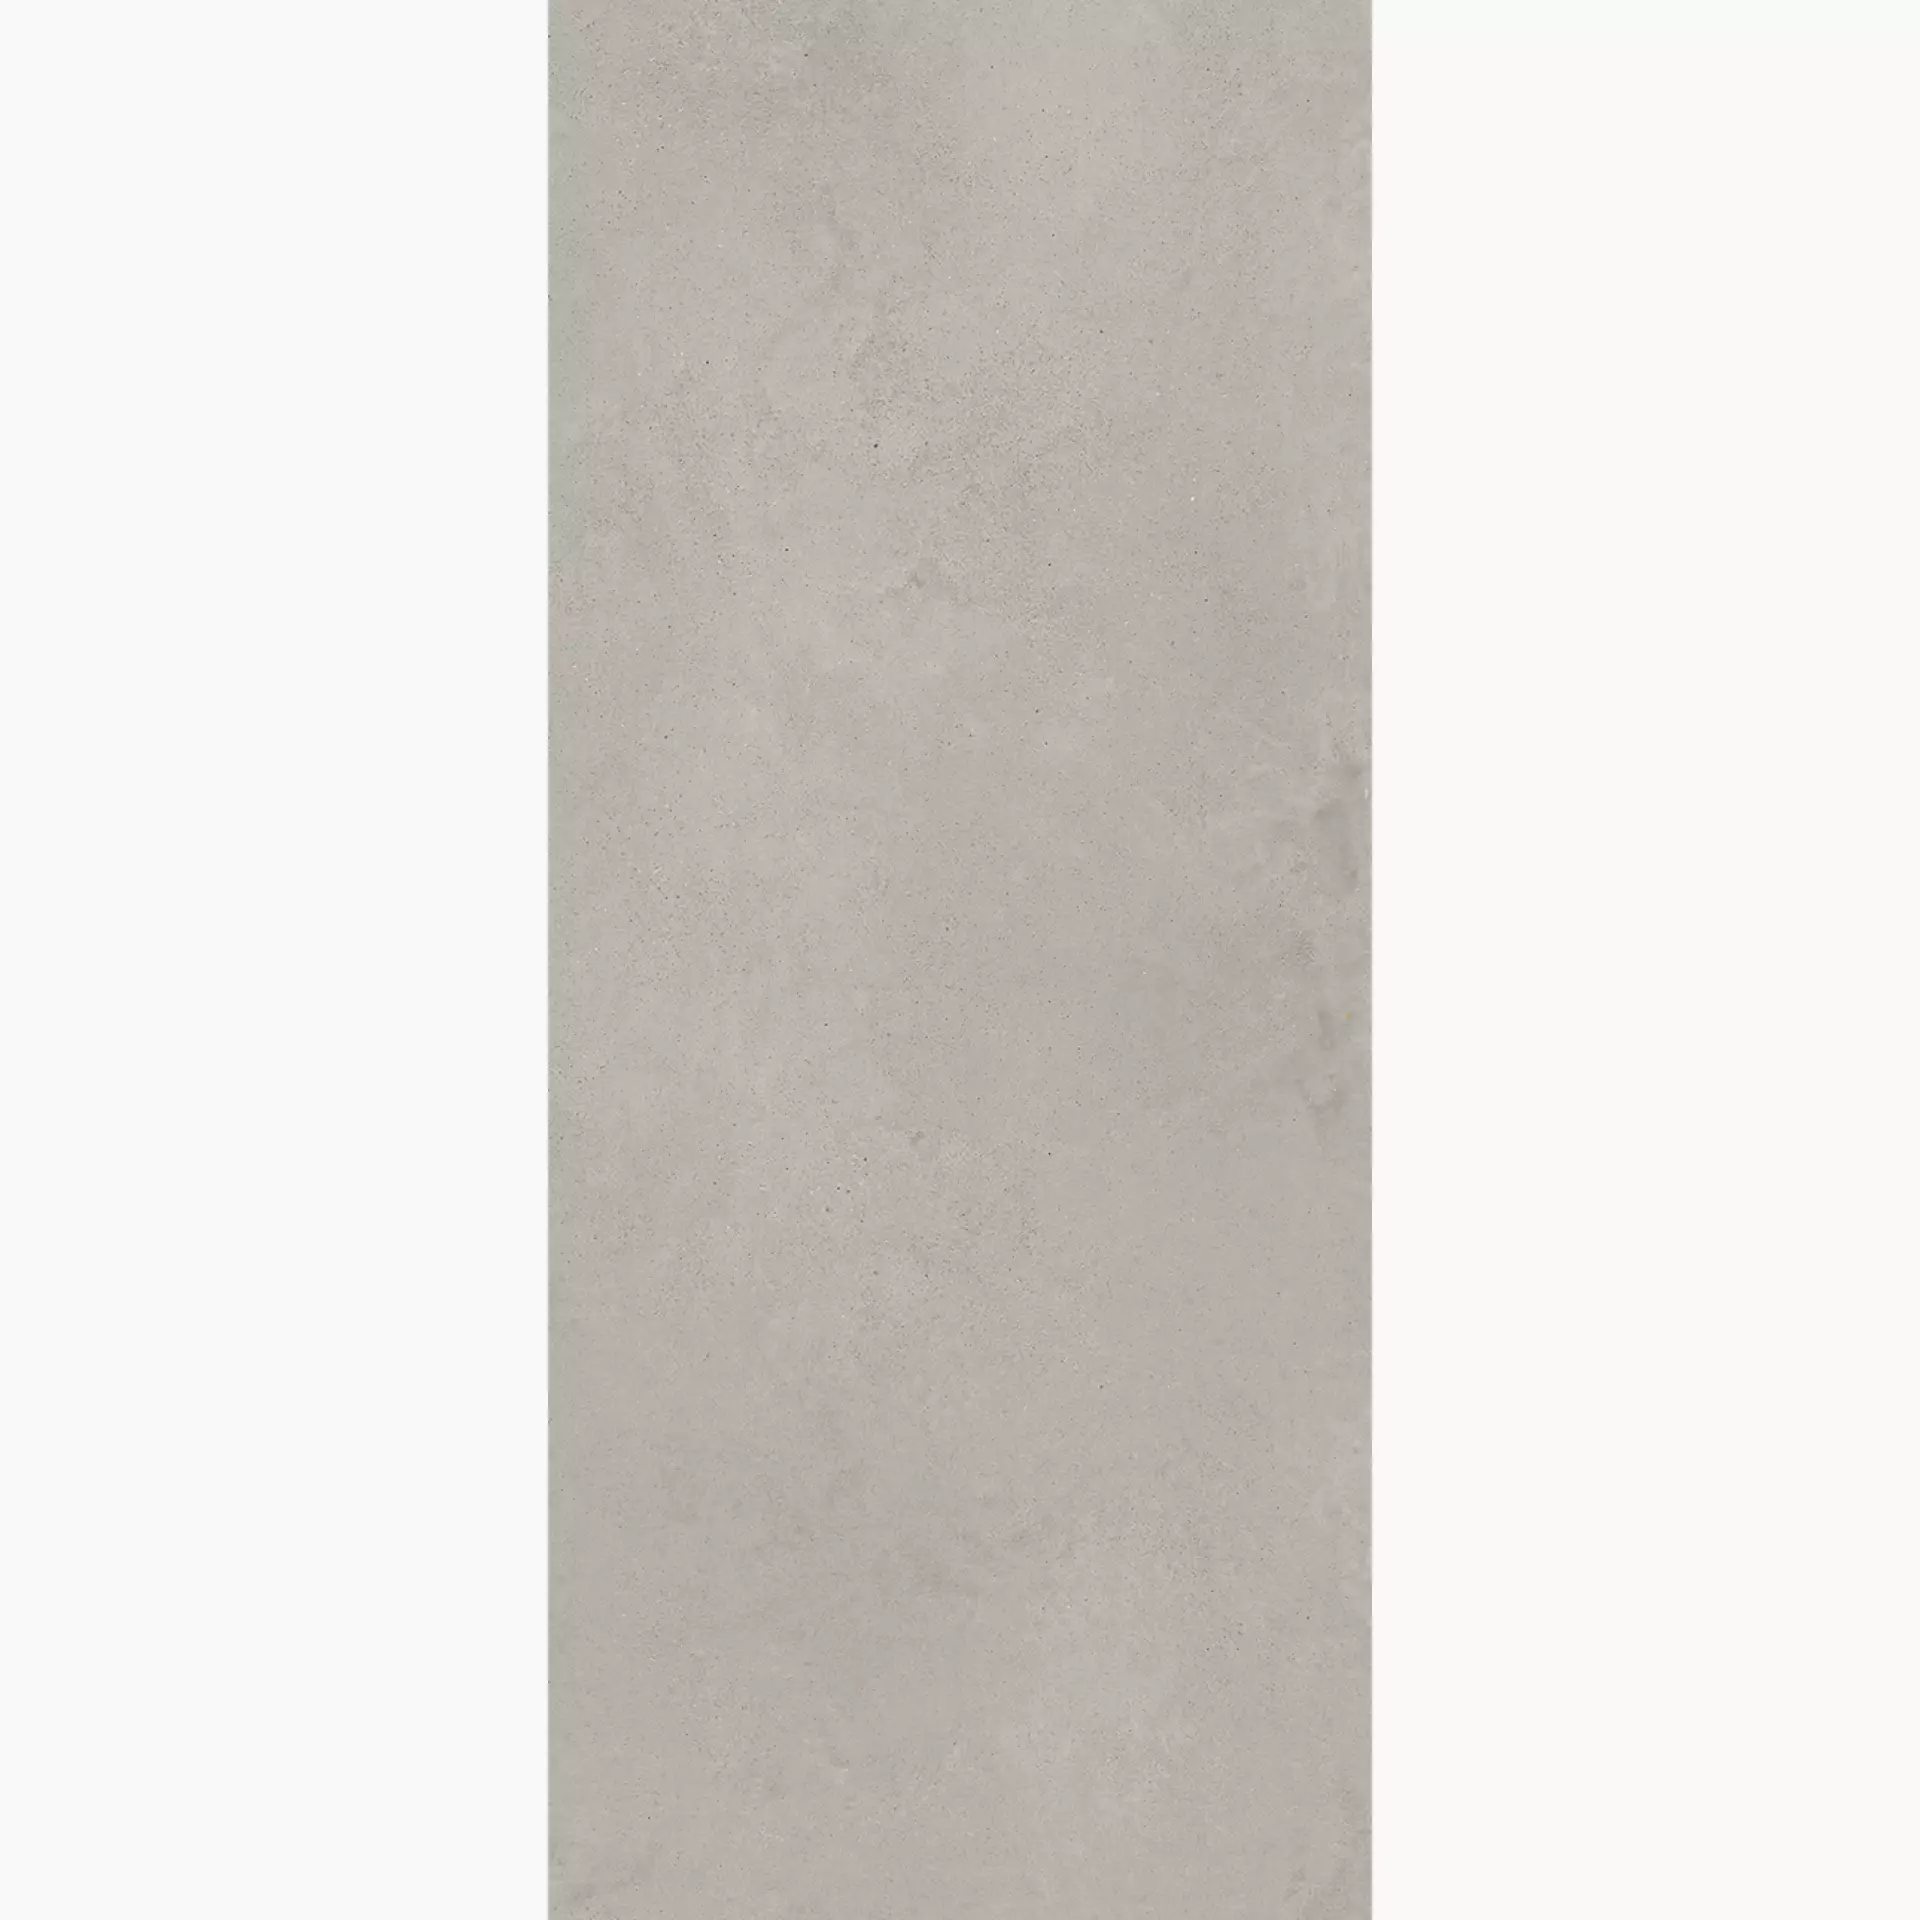 Coem Wide Gres Grey Naturale Cement Effect 0CE283R 120x280cm rectified 6mm